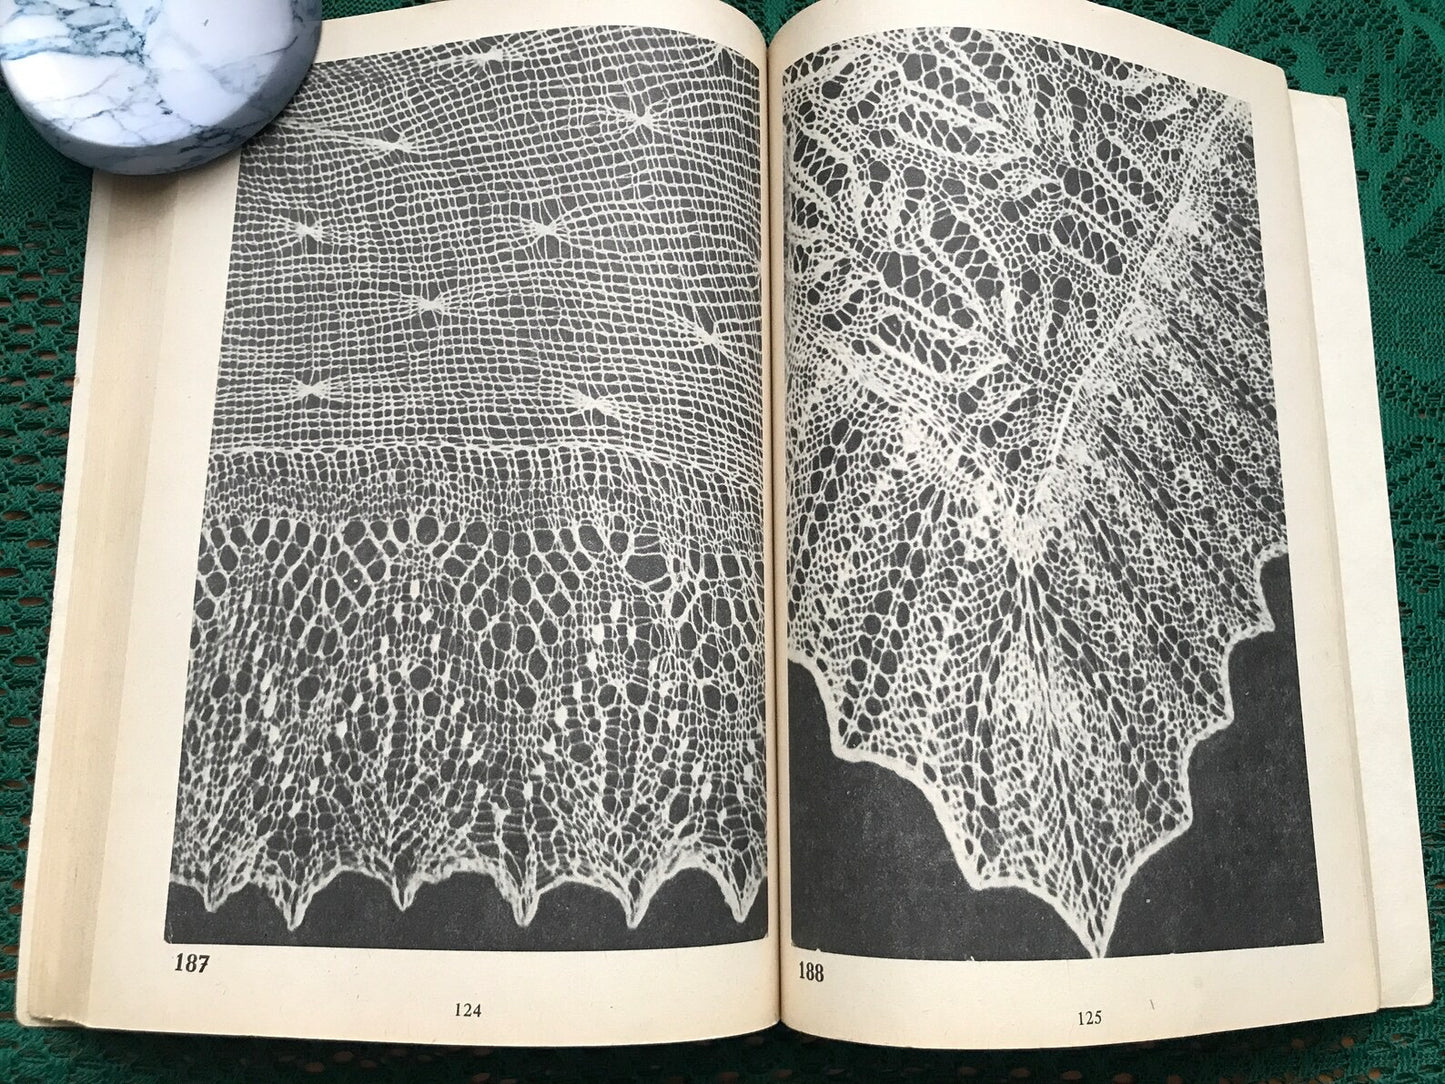 Vintage Estonian Crafts book - Lace making knitting manual, techniques and patterns - Printed in 1970s